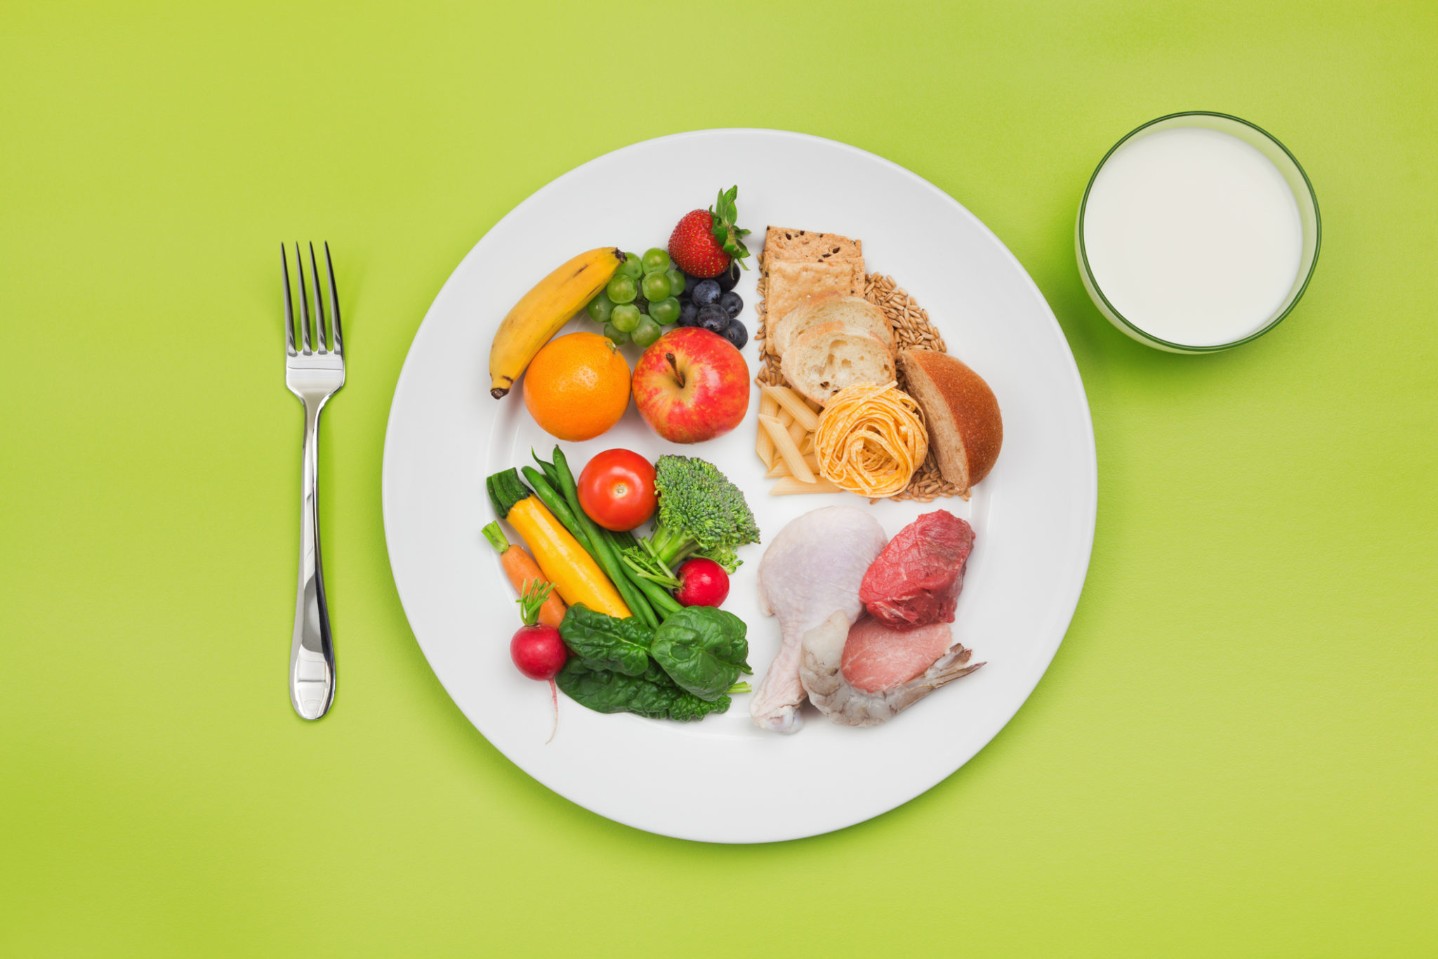 ChooseMyPlate Healthy Food and Plate of USDA Balanced Diet Recommendation||my-plate